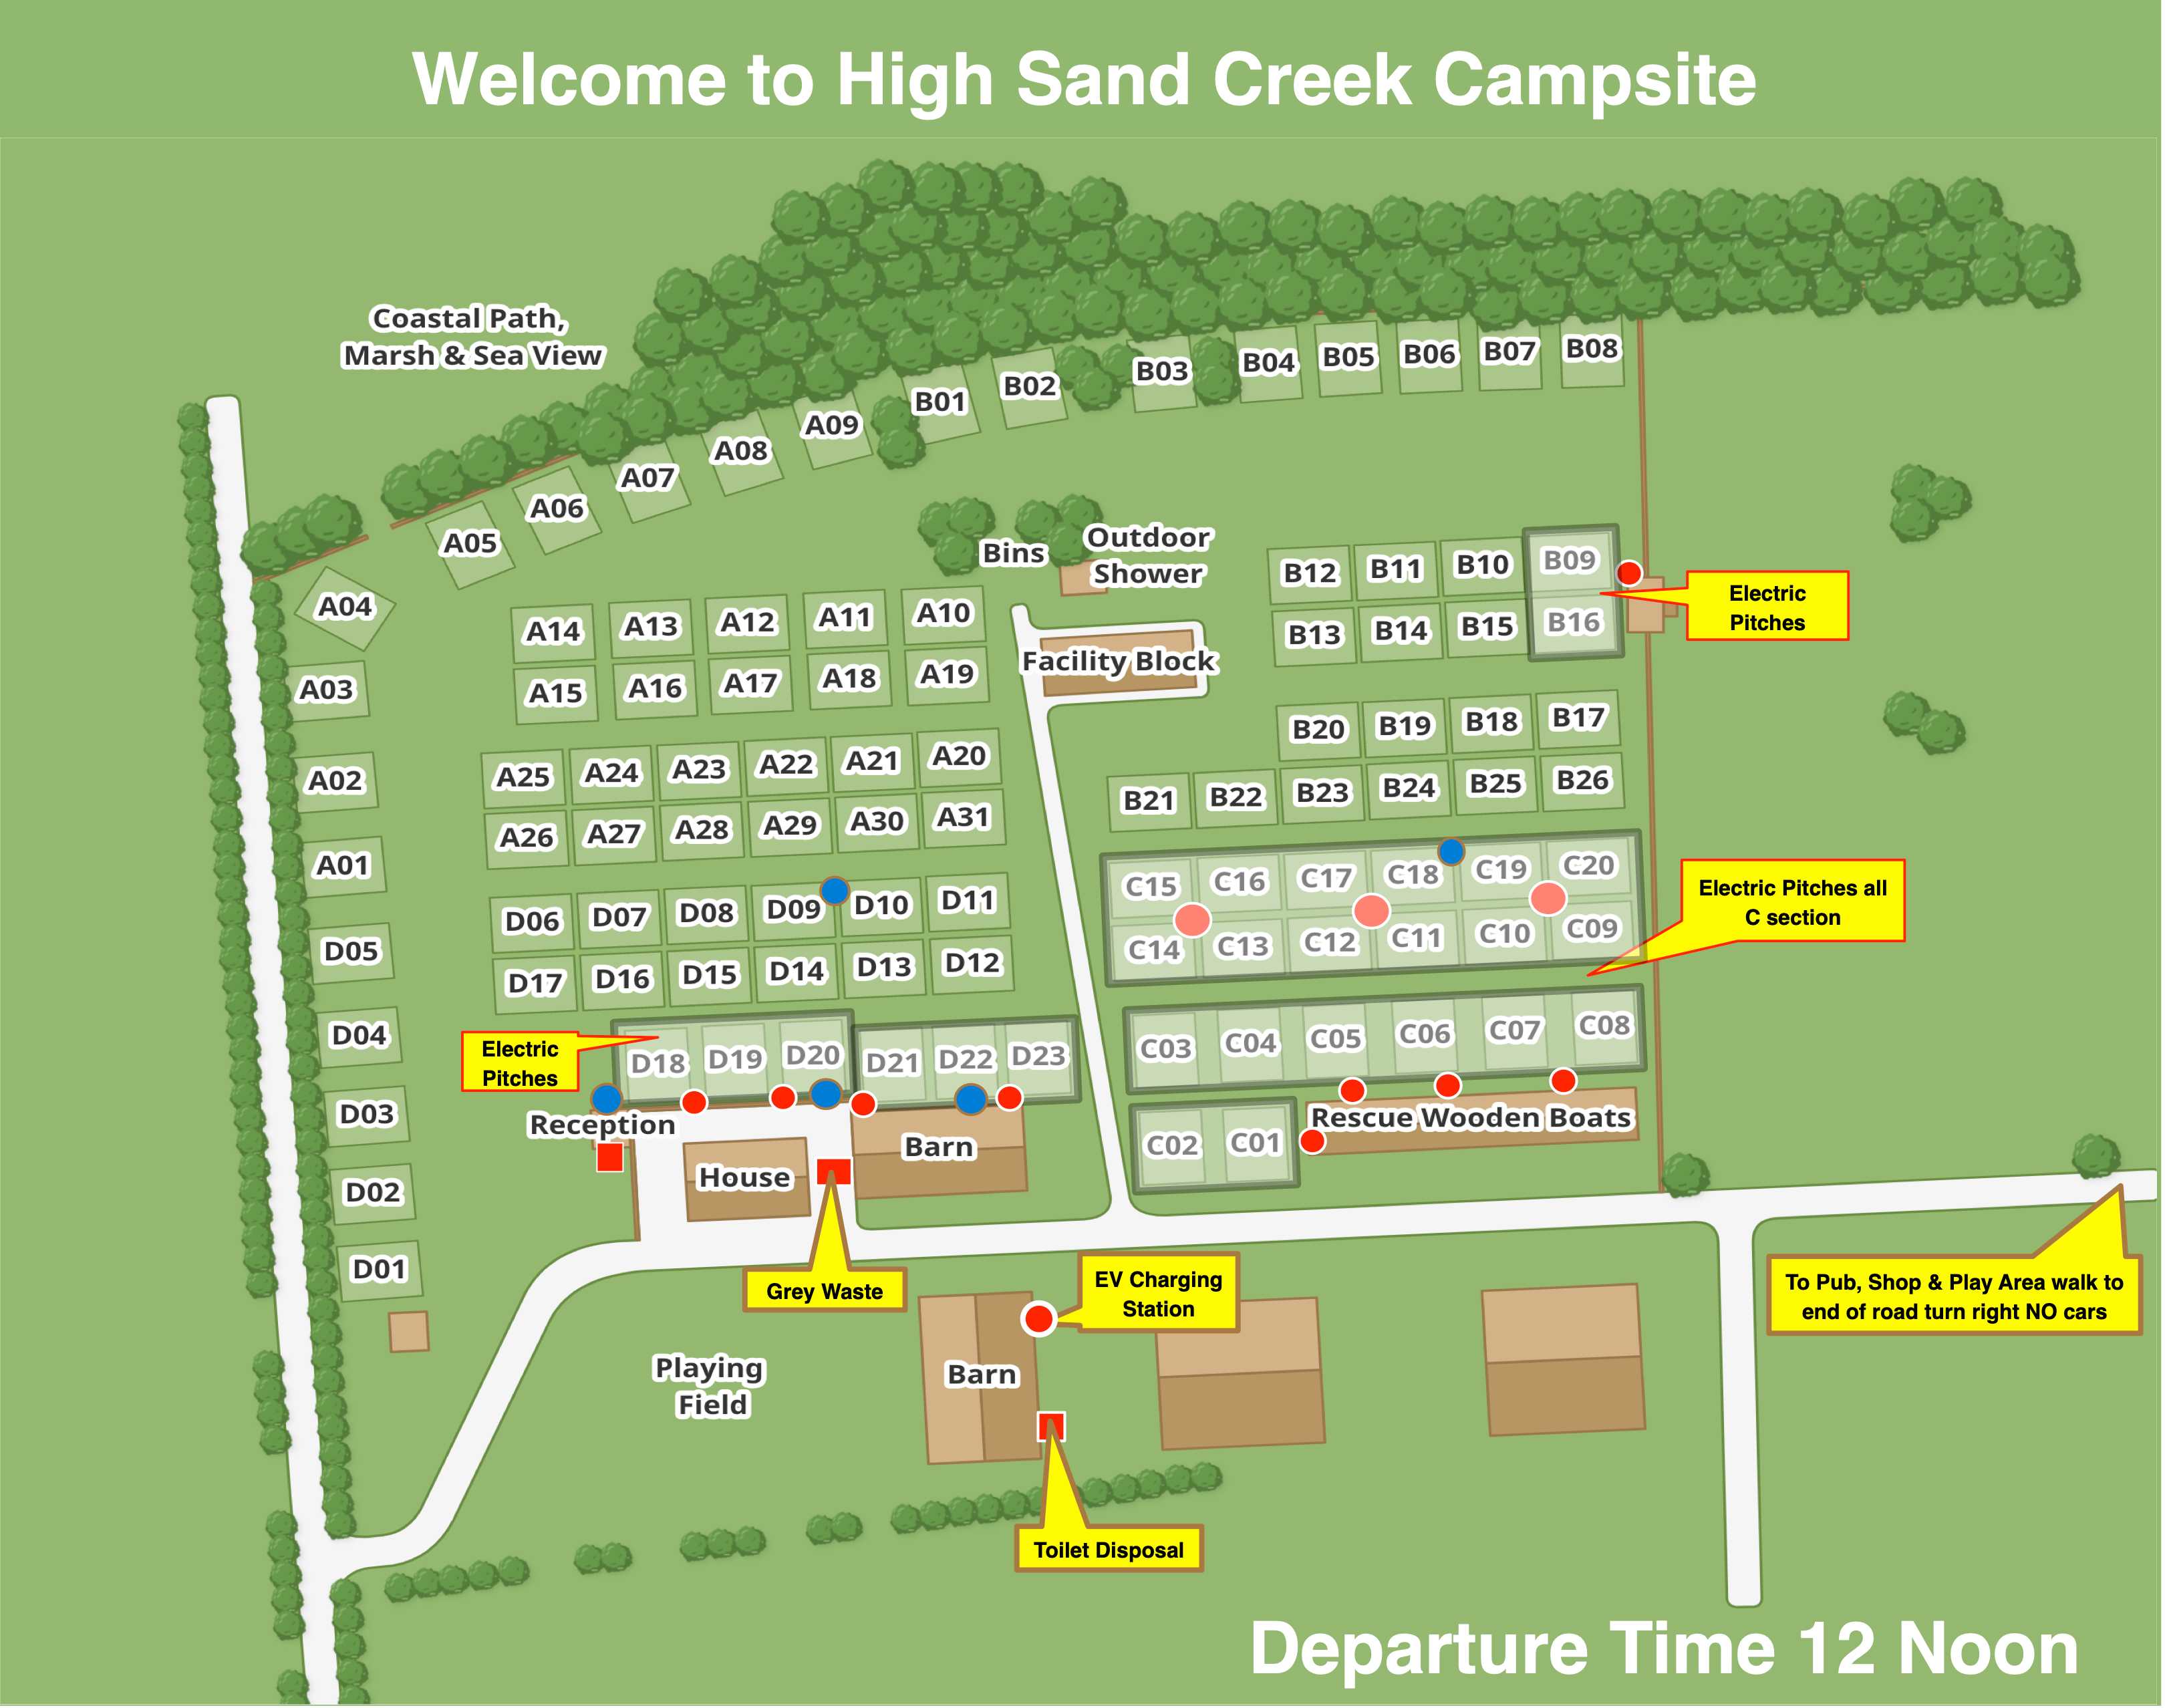 Image showing an illustration of a camp site map, pitches and facilities block